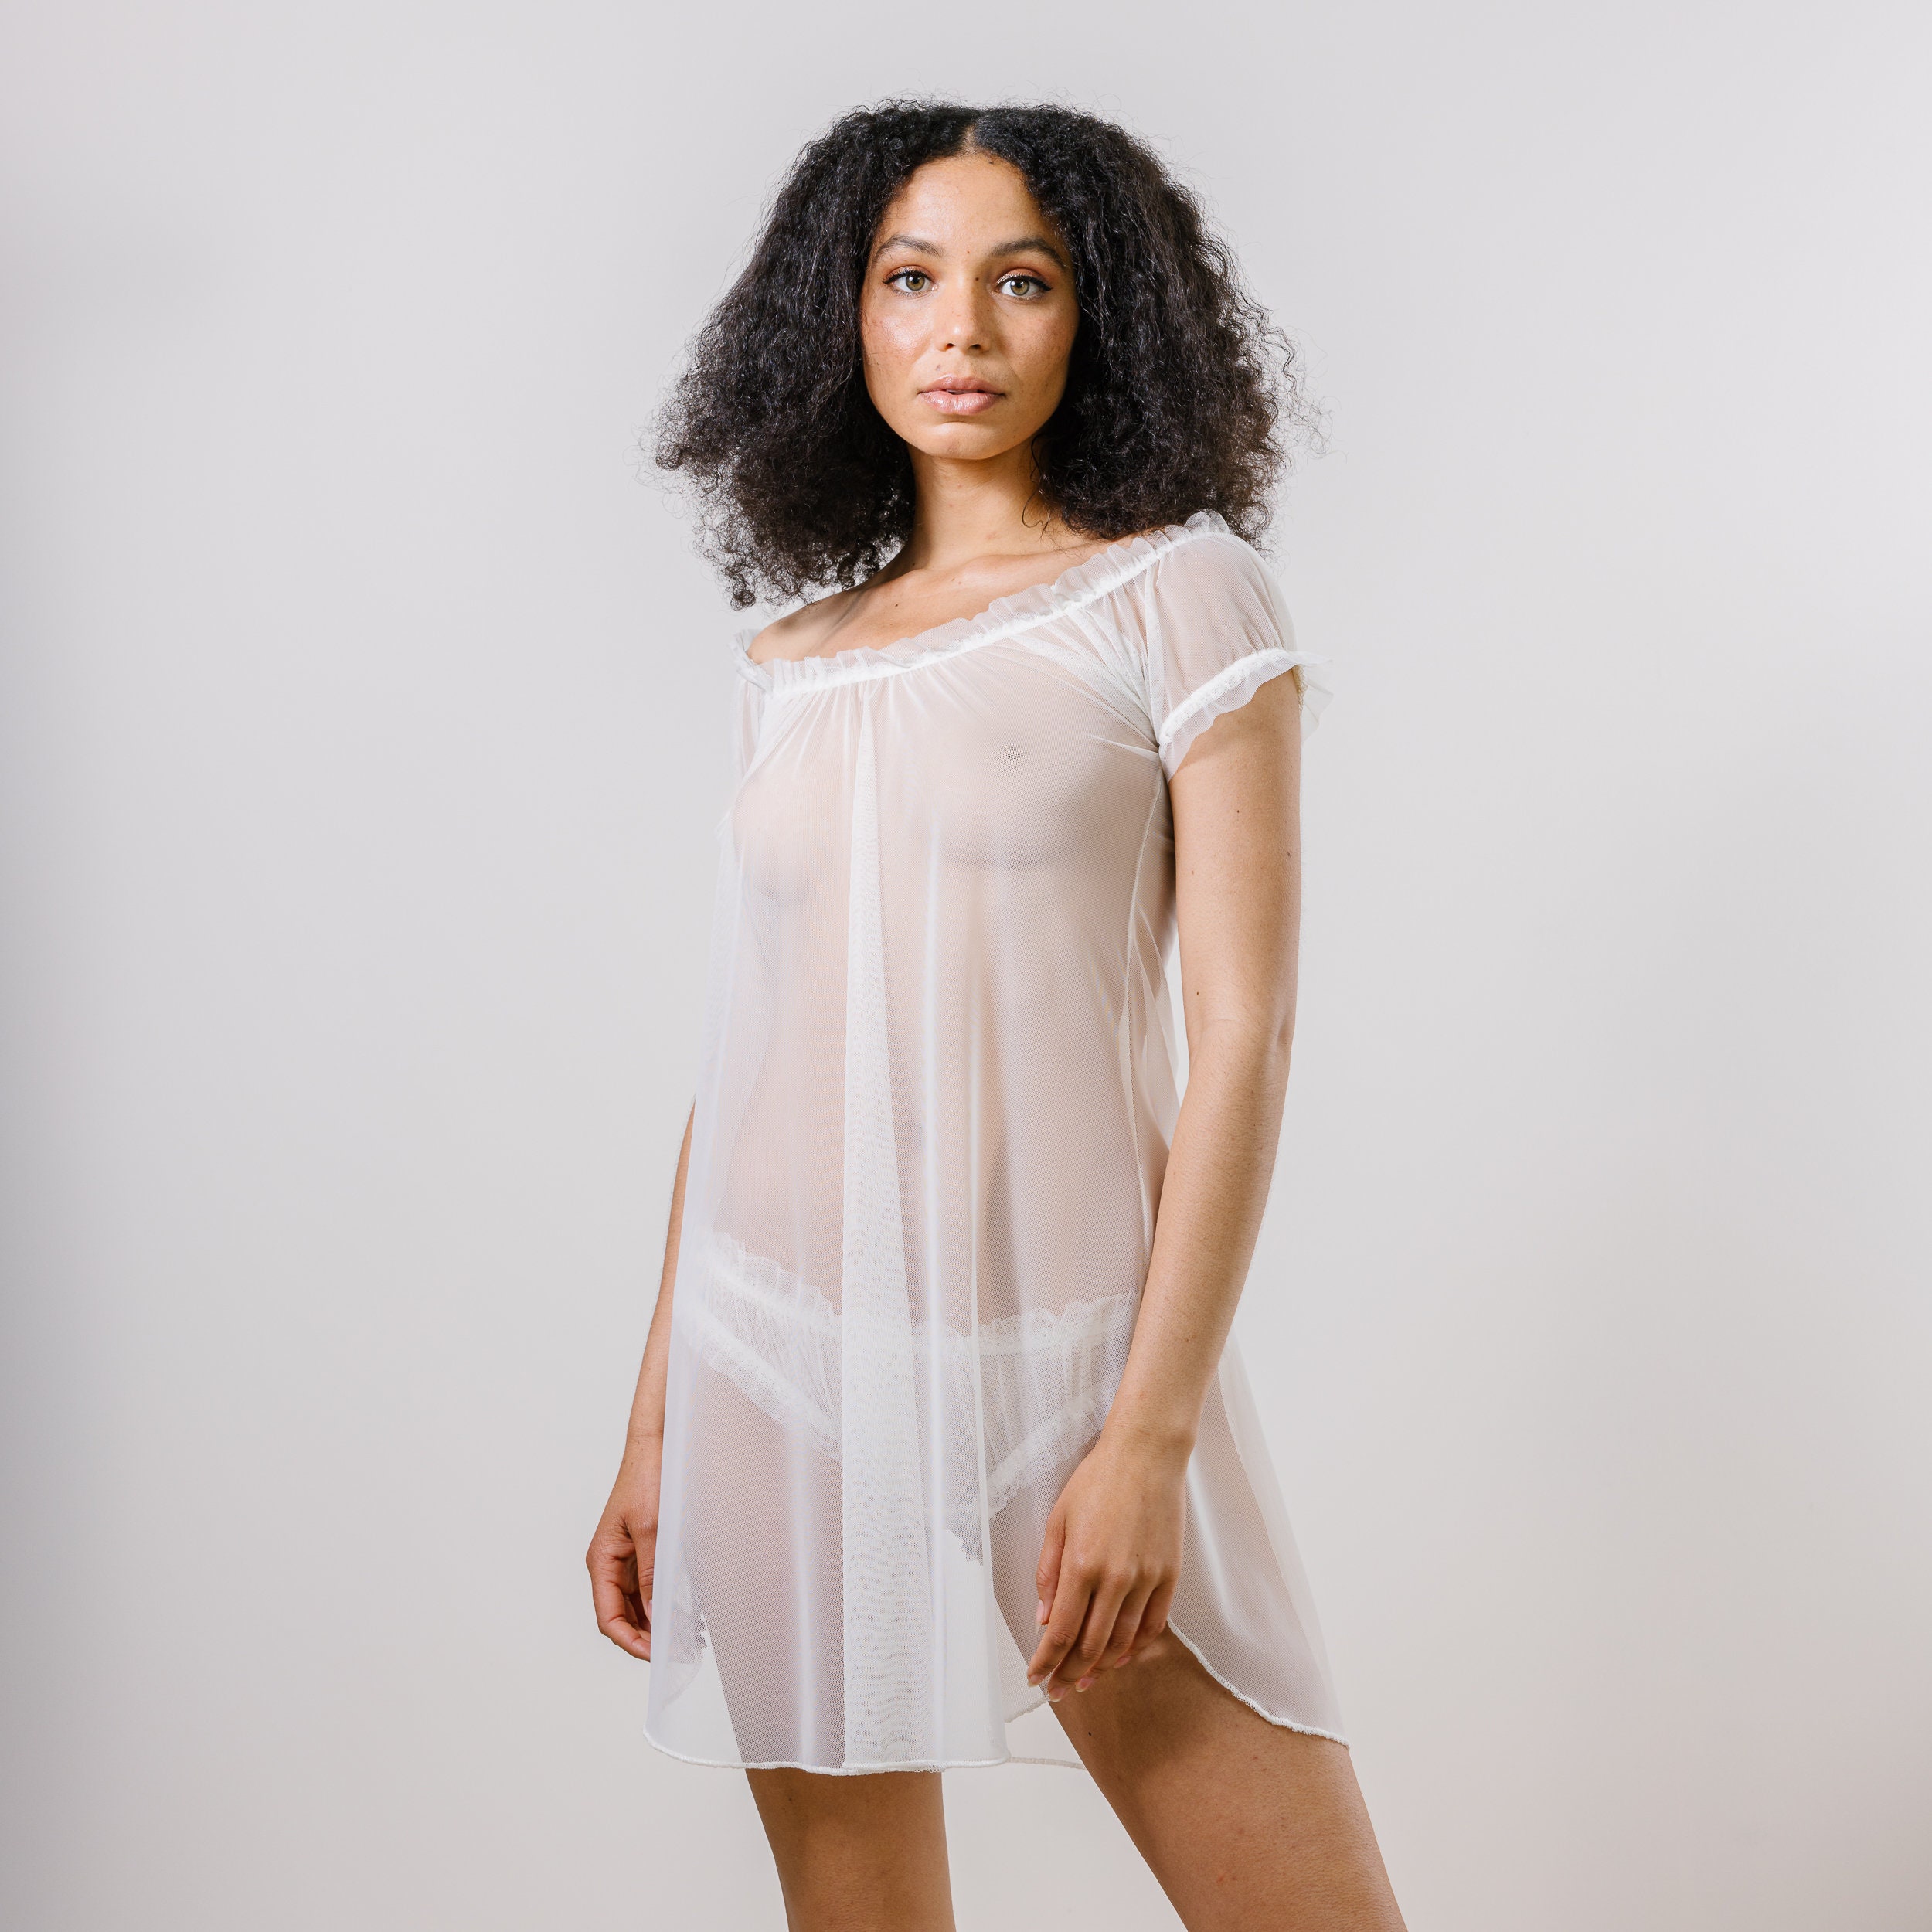 Sheer Chemise Lingerie Set Including the Nightgown and Full pic